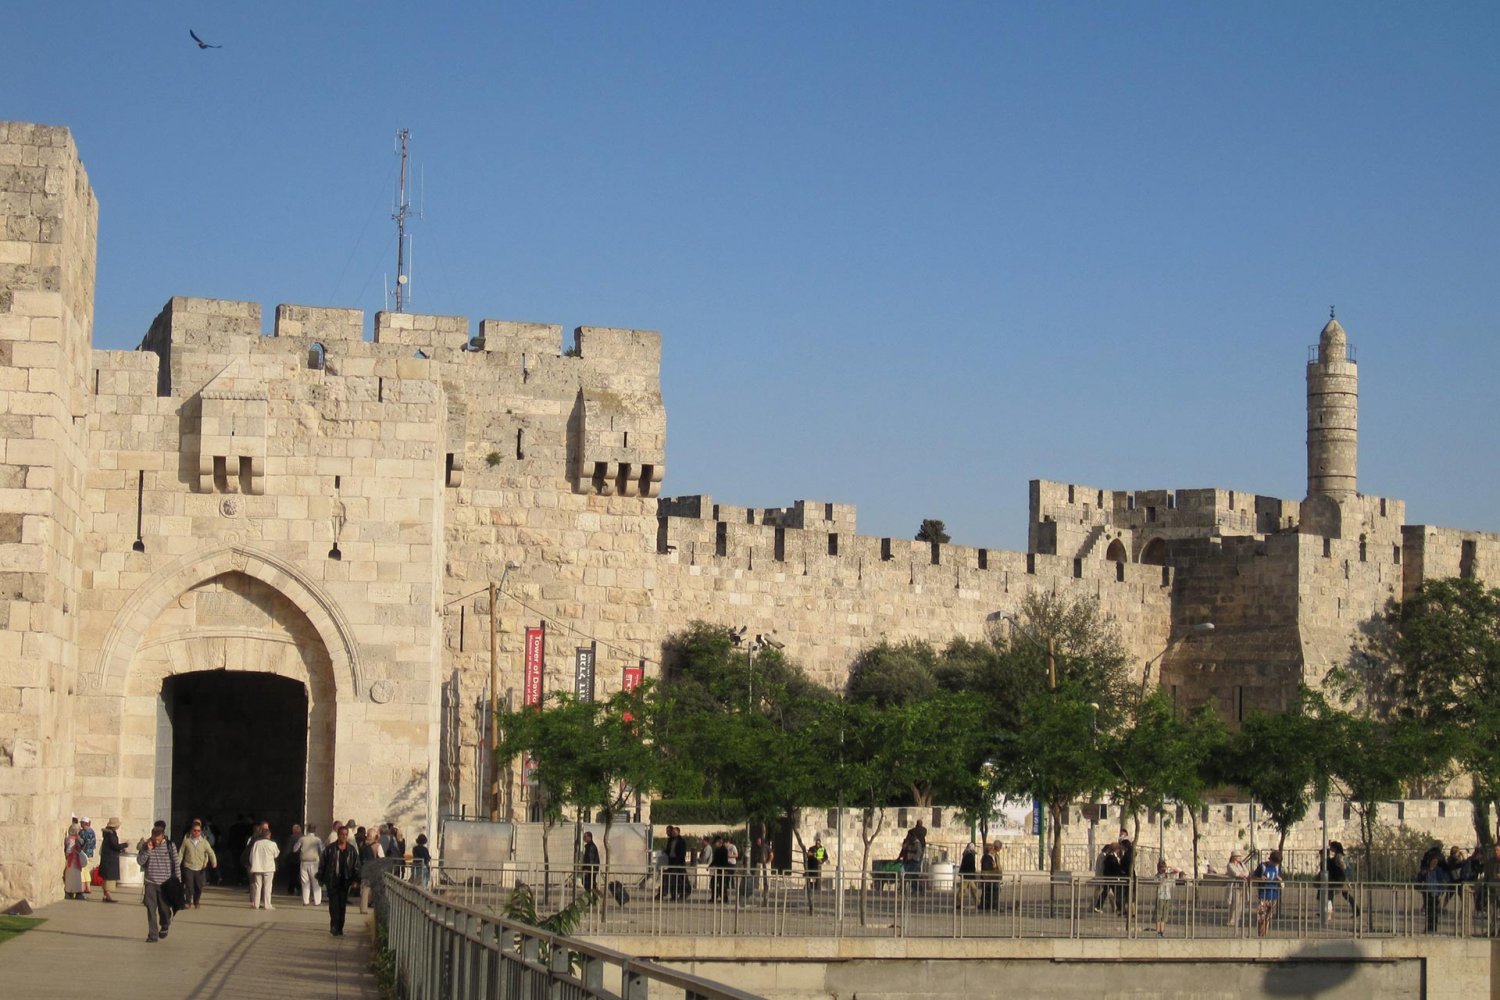 Jerusalem's ancient Jaffa Gate, left, with the Tower of David on the right, 2010